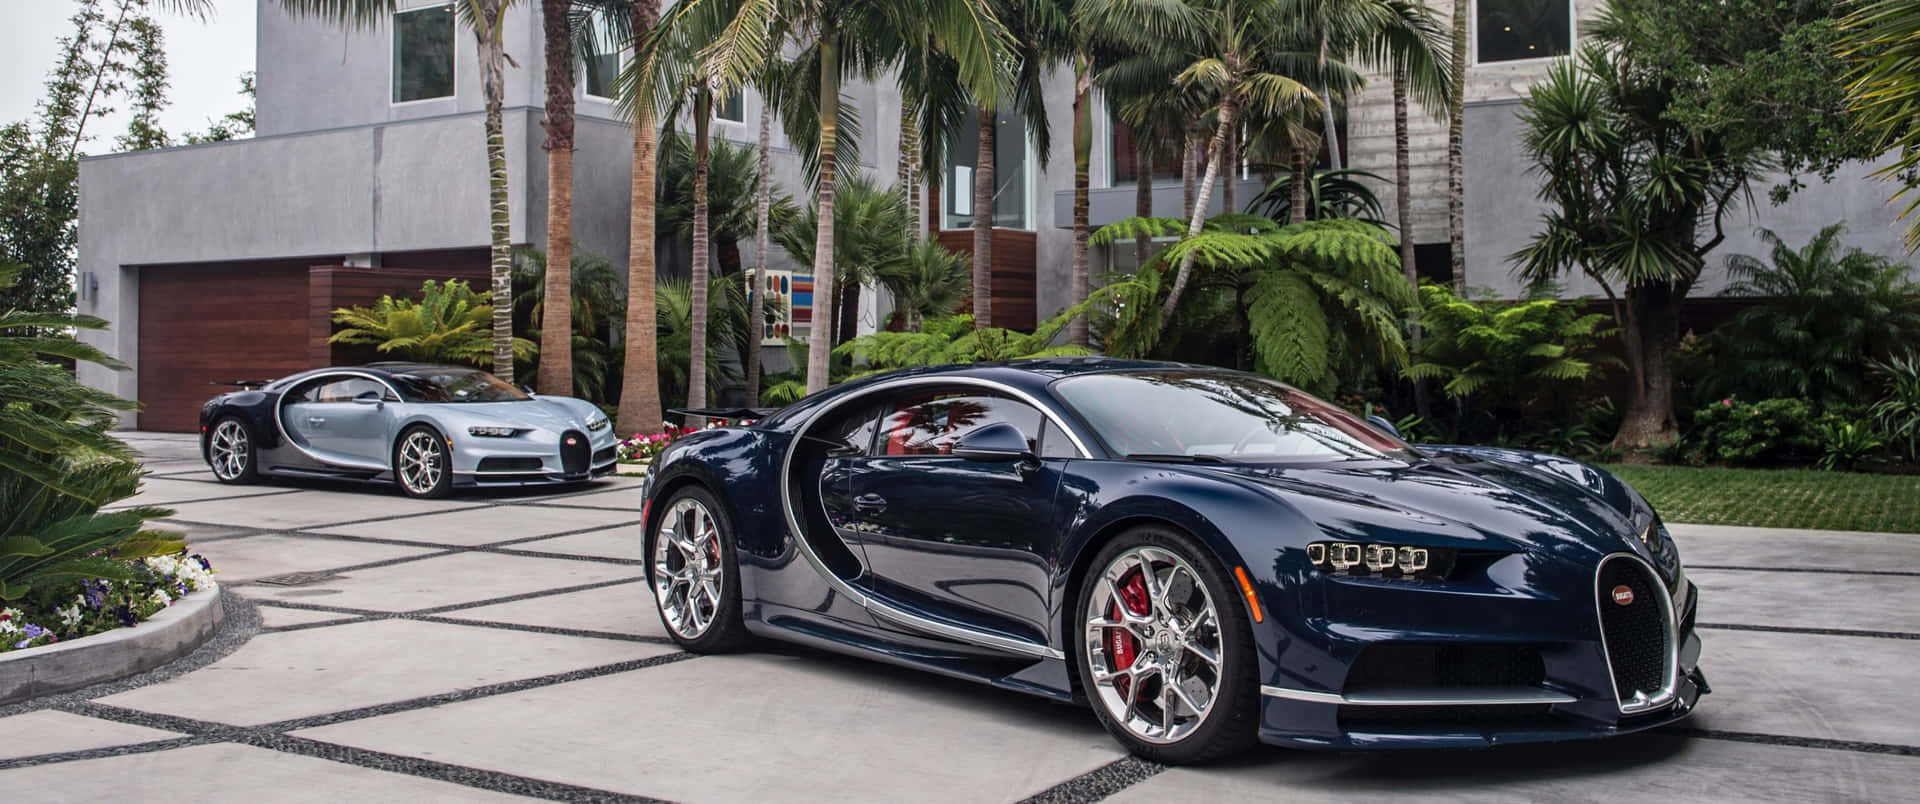 Enjoy the world’s finest engineering with this stunning Bugatti background